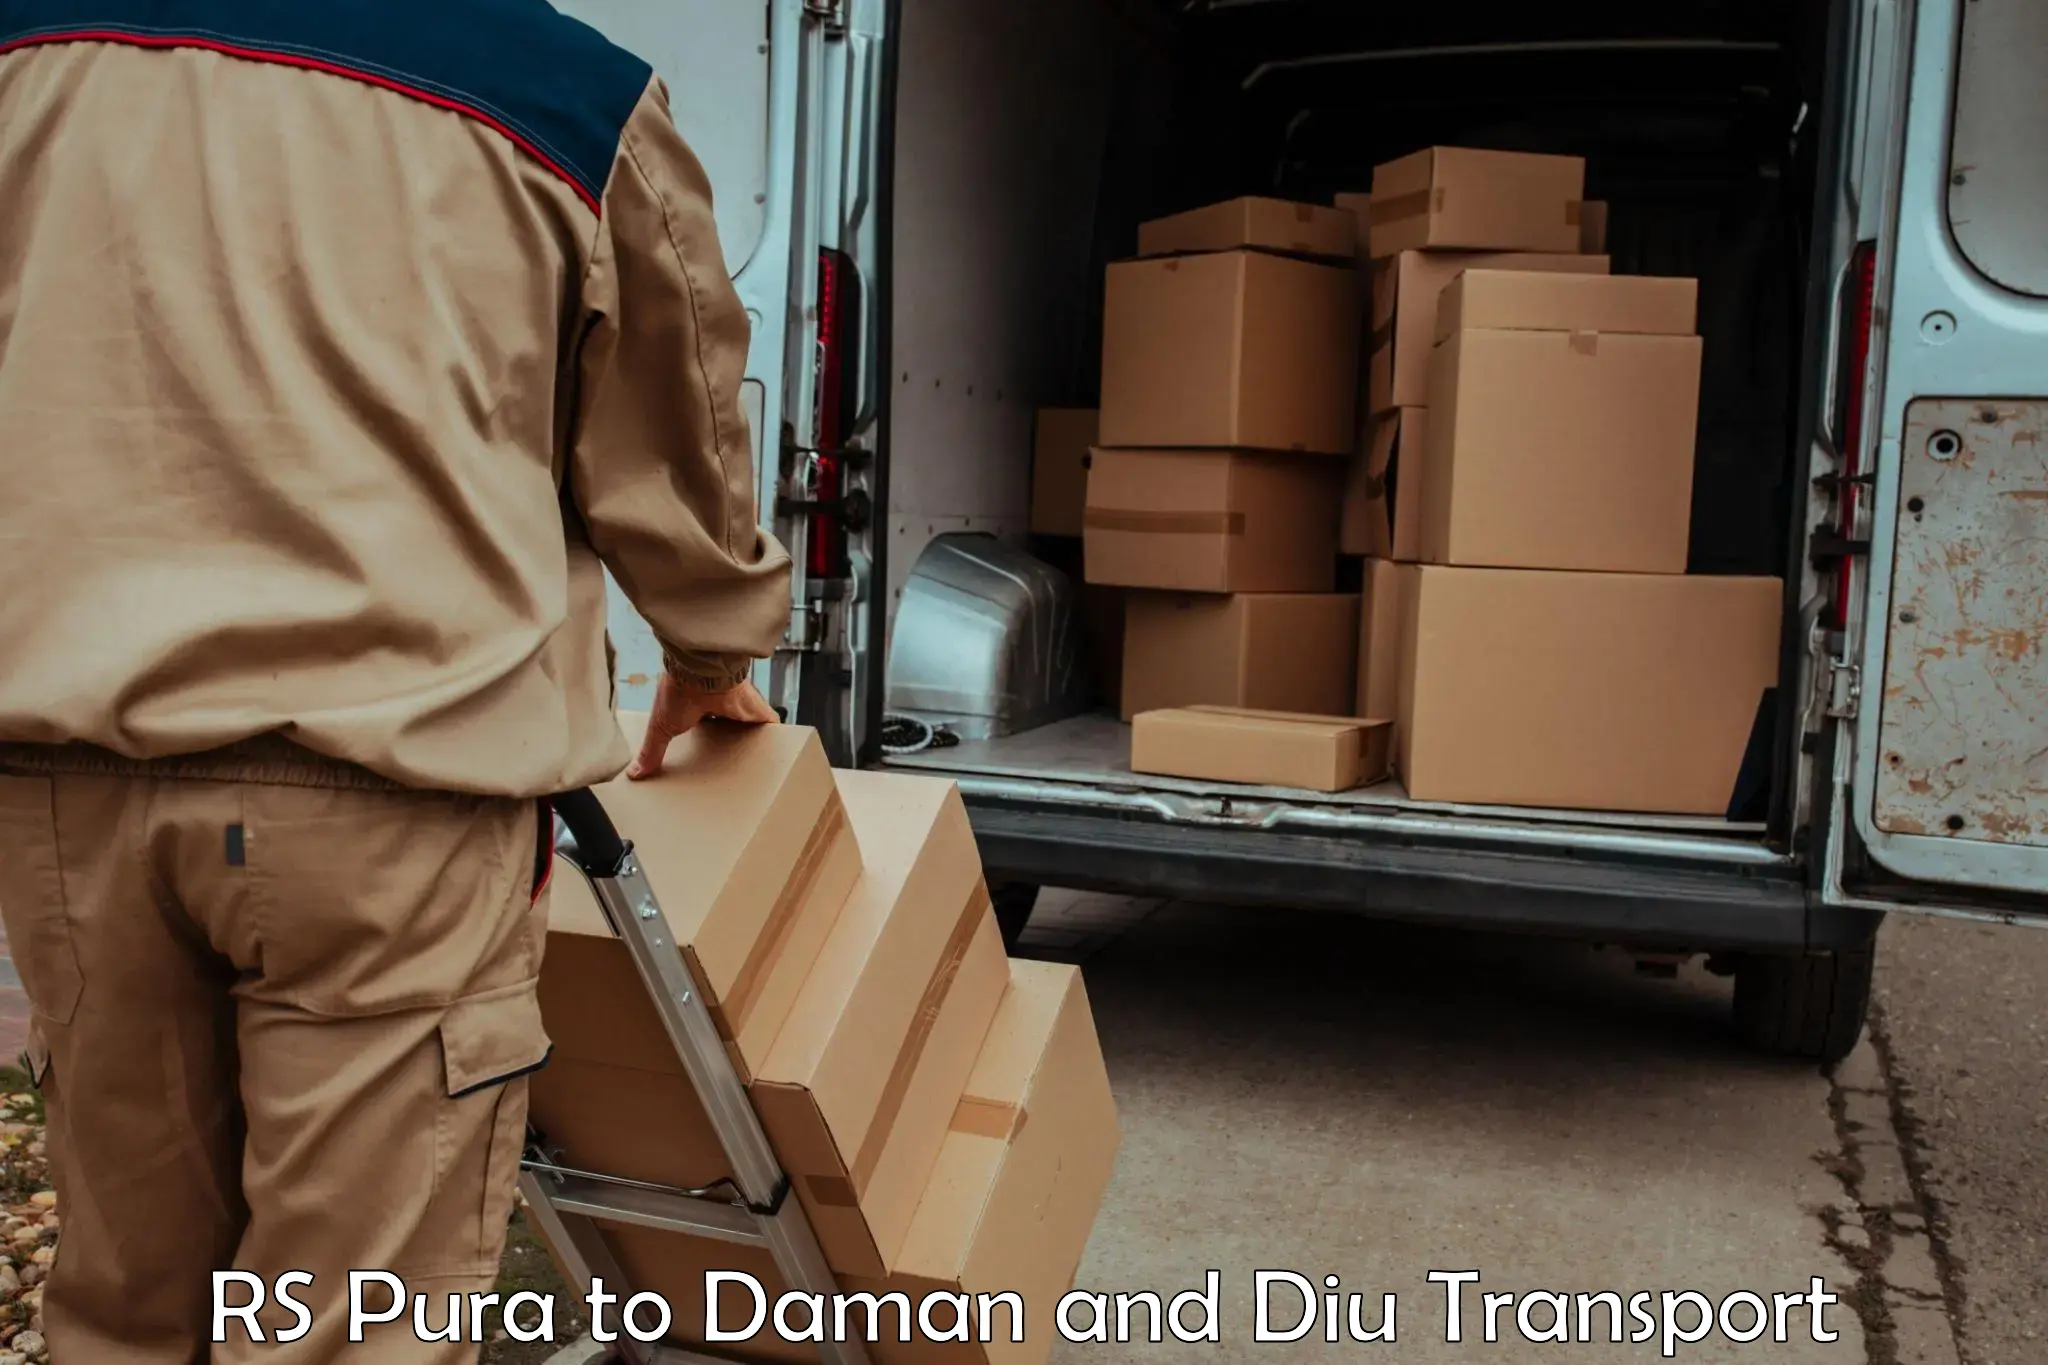 Transport services RS Pura to Daman and Diu